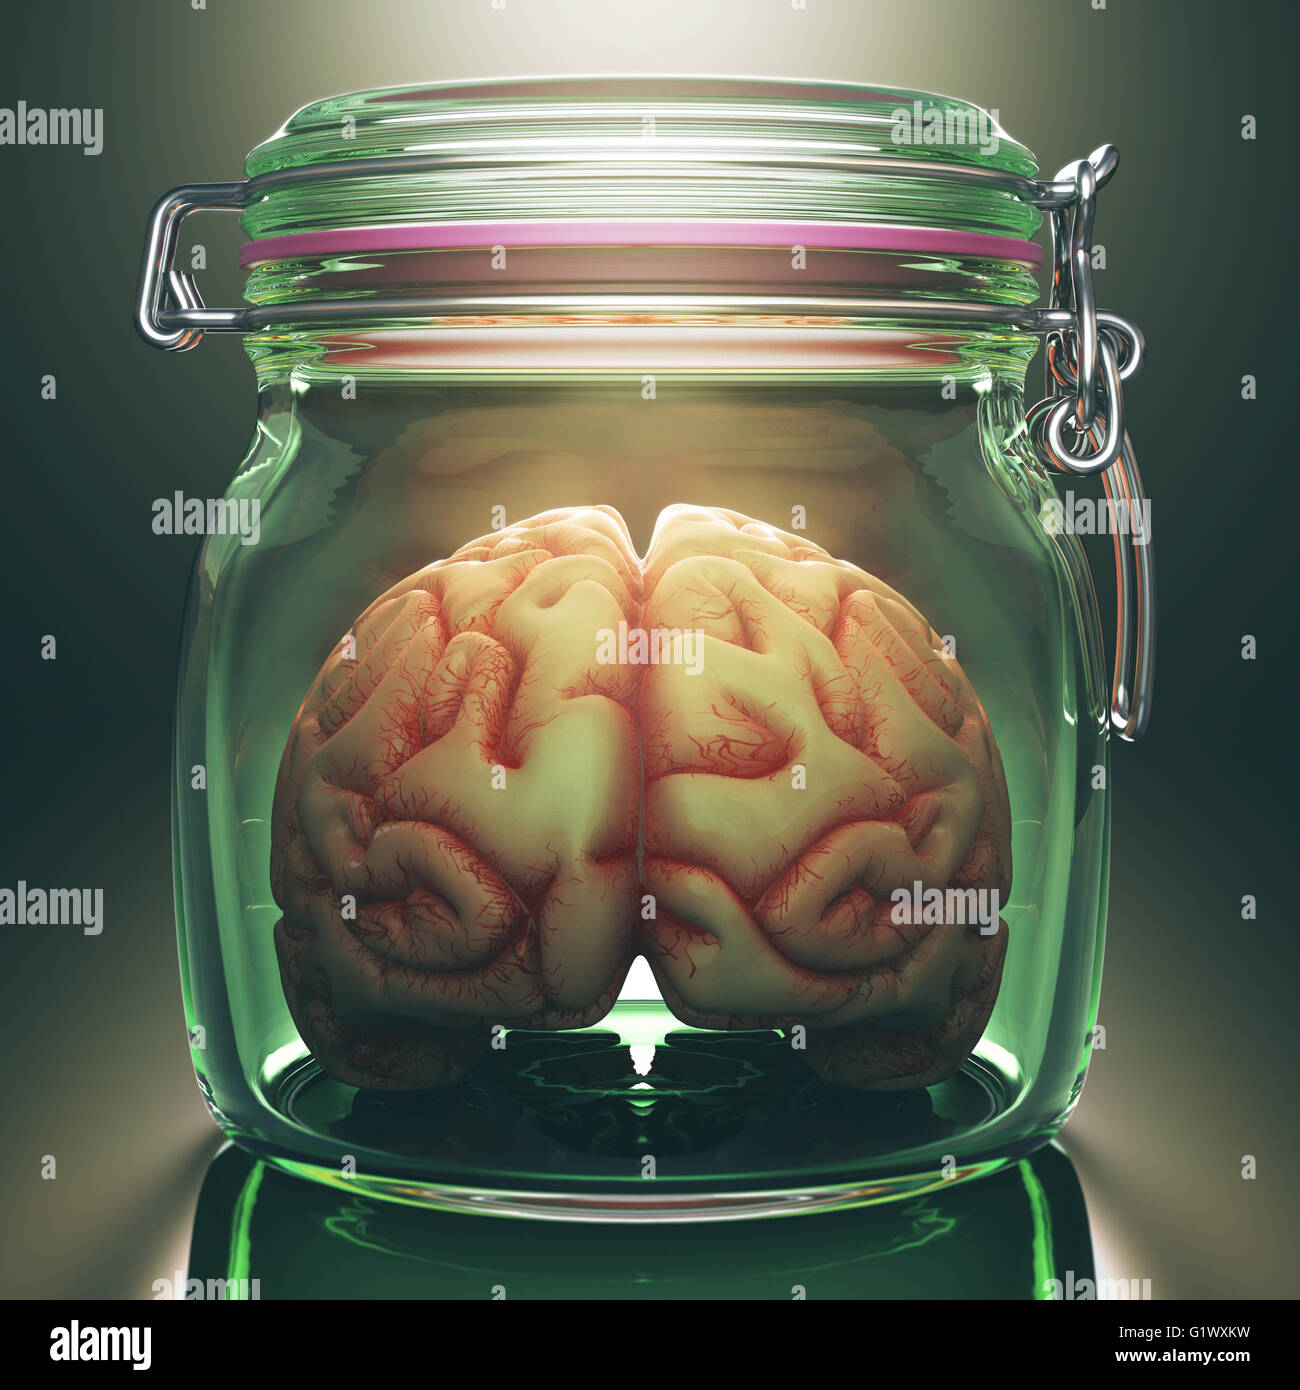 Concept image of a brain inside an hermetic glass storage. Clipping path included. Stock Photo